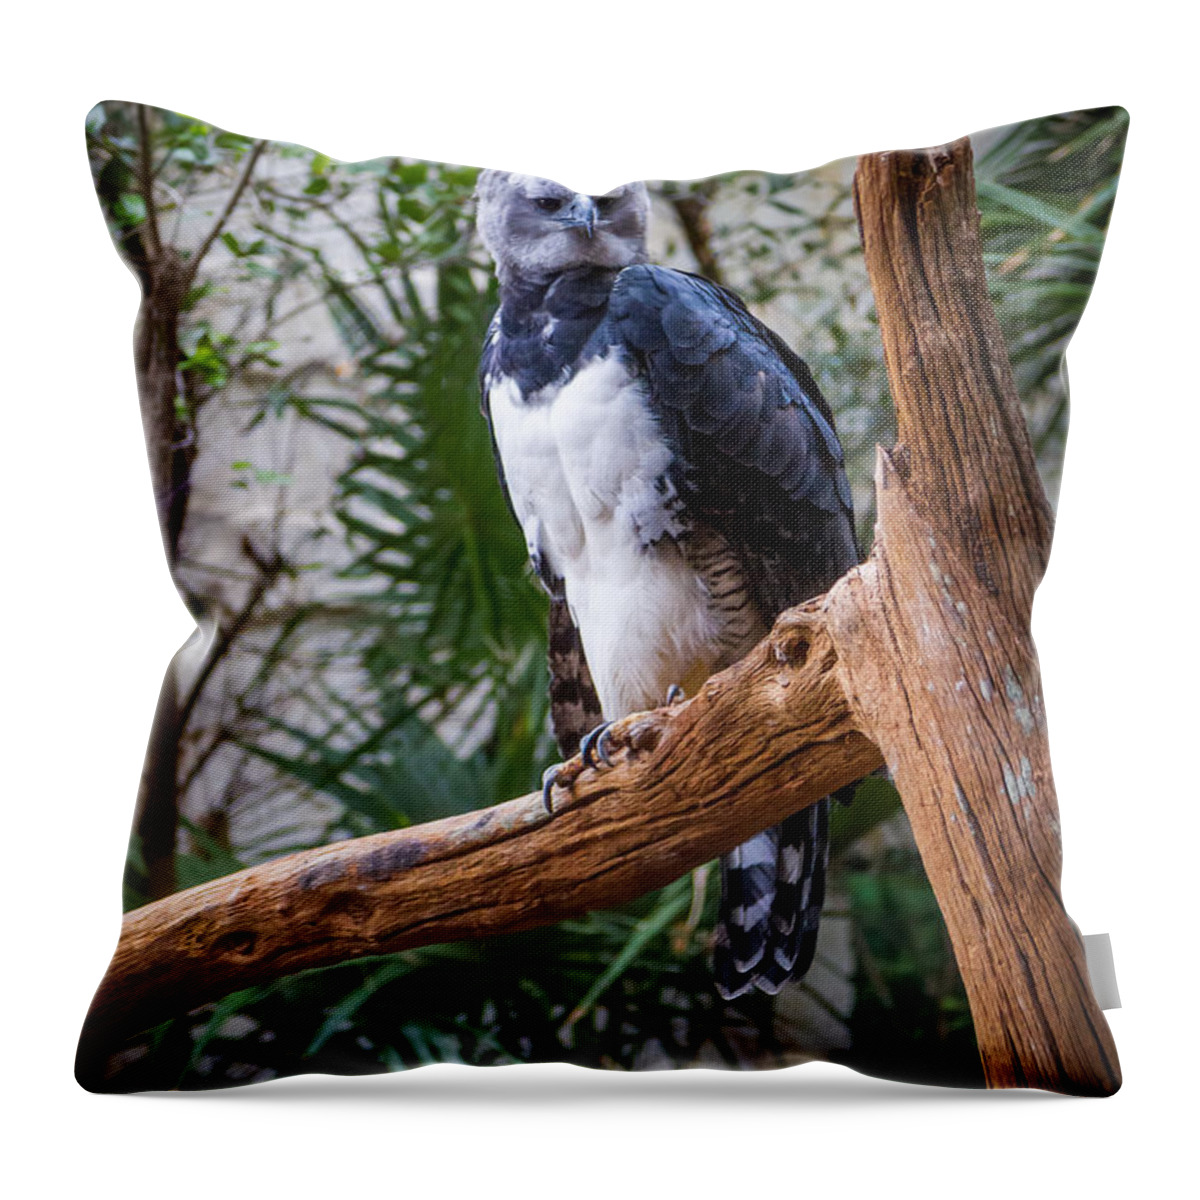 Predator Throw Pillow featuring the photograph Harpy Eagle by Ken Stanback